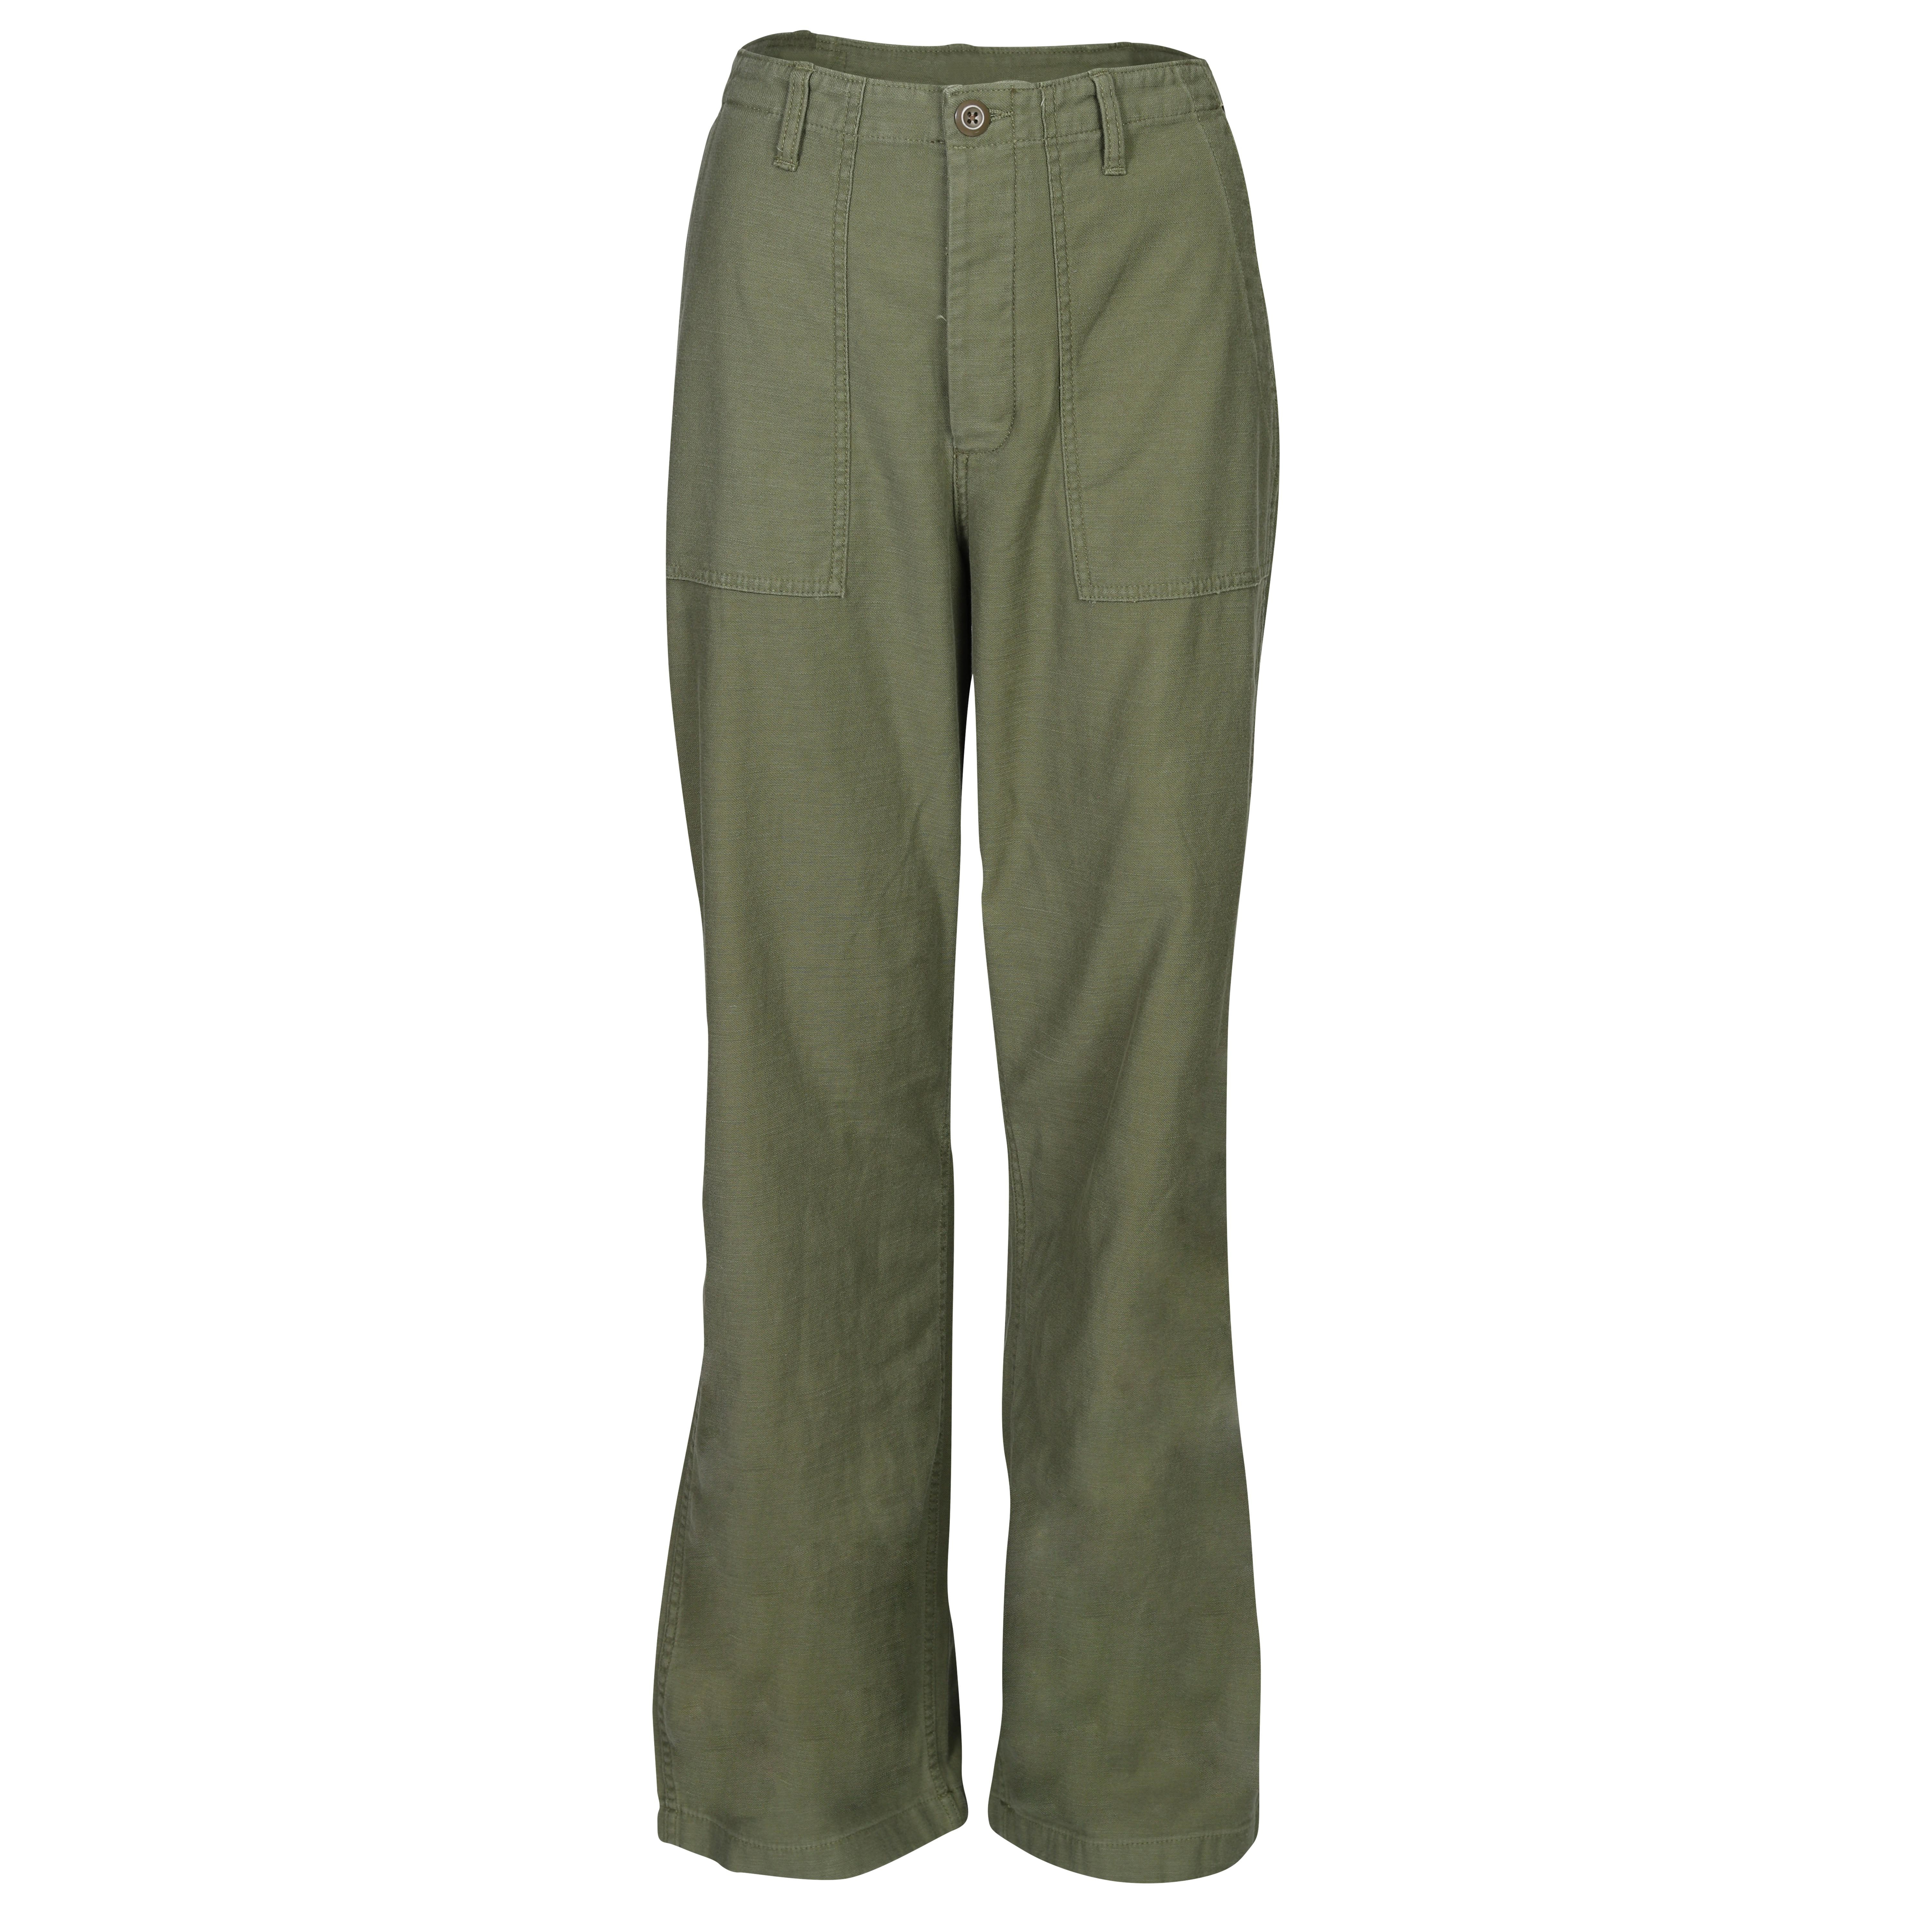 R13 Wide Leg Utility Pant in Olive 27